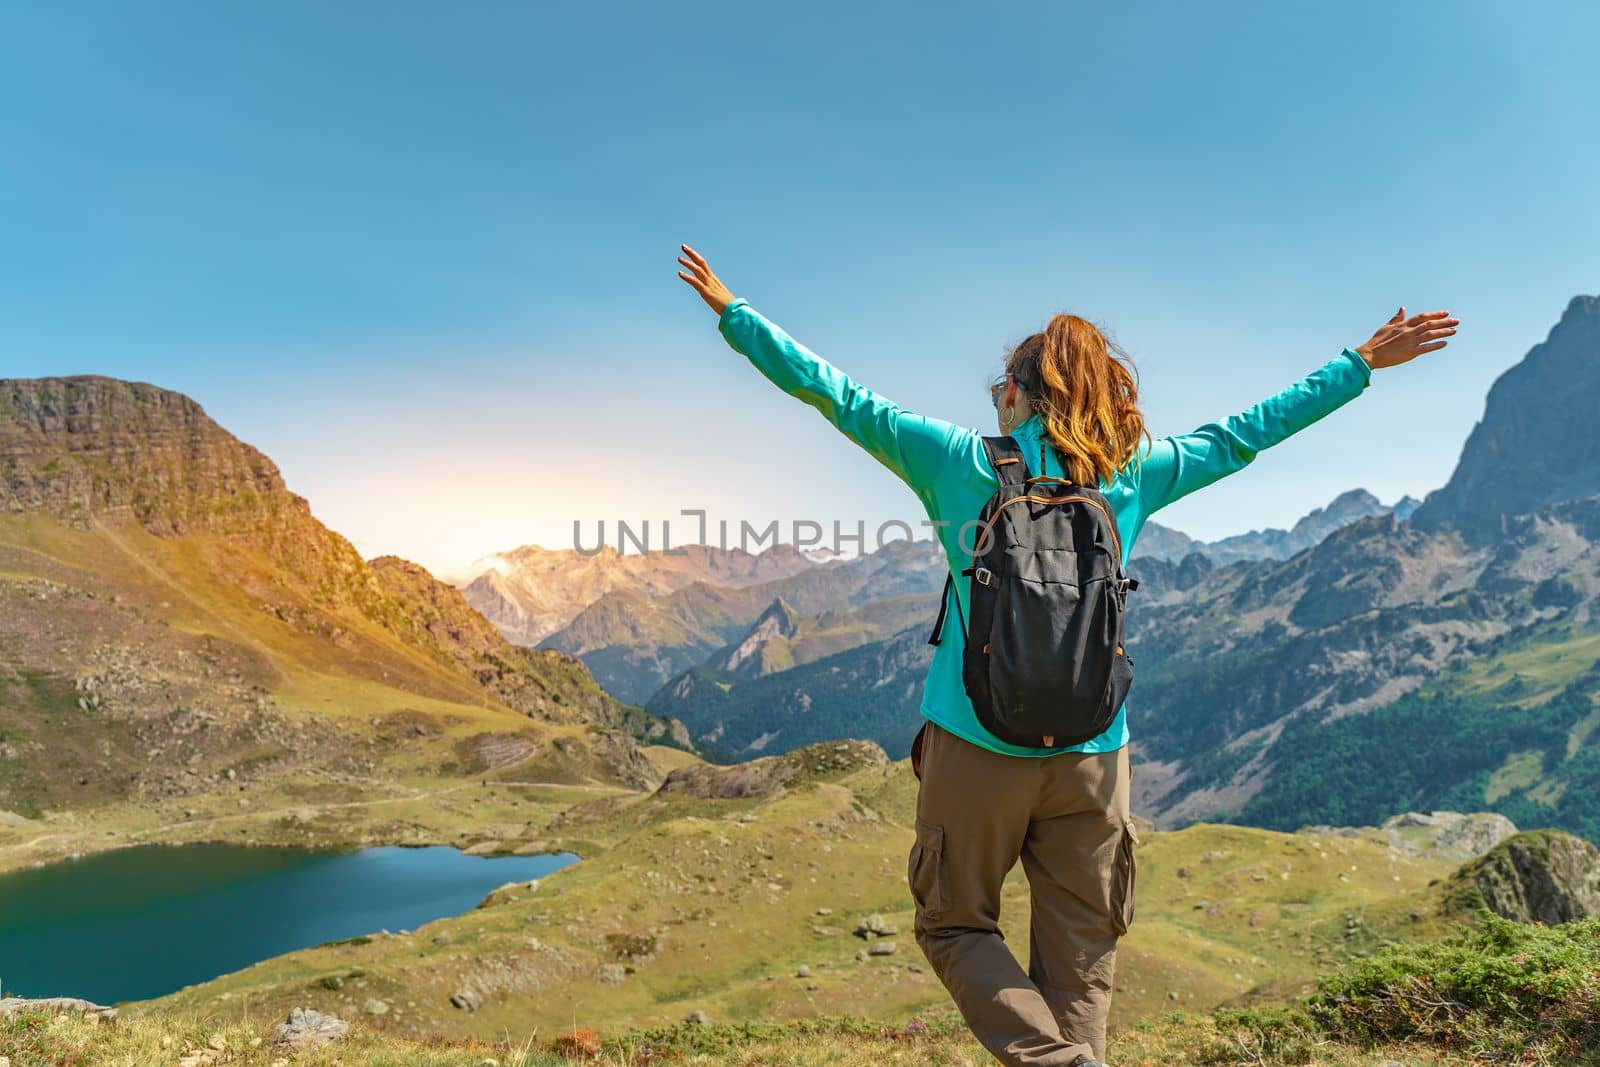 Attractive young woman with open arms enjoying life in the middle of a mountain with a lake in a beautiful landscape. by PaulCarr